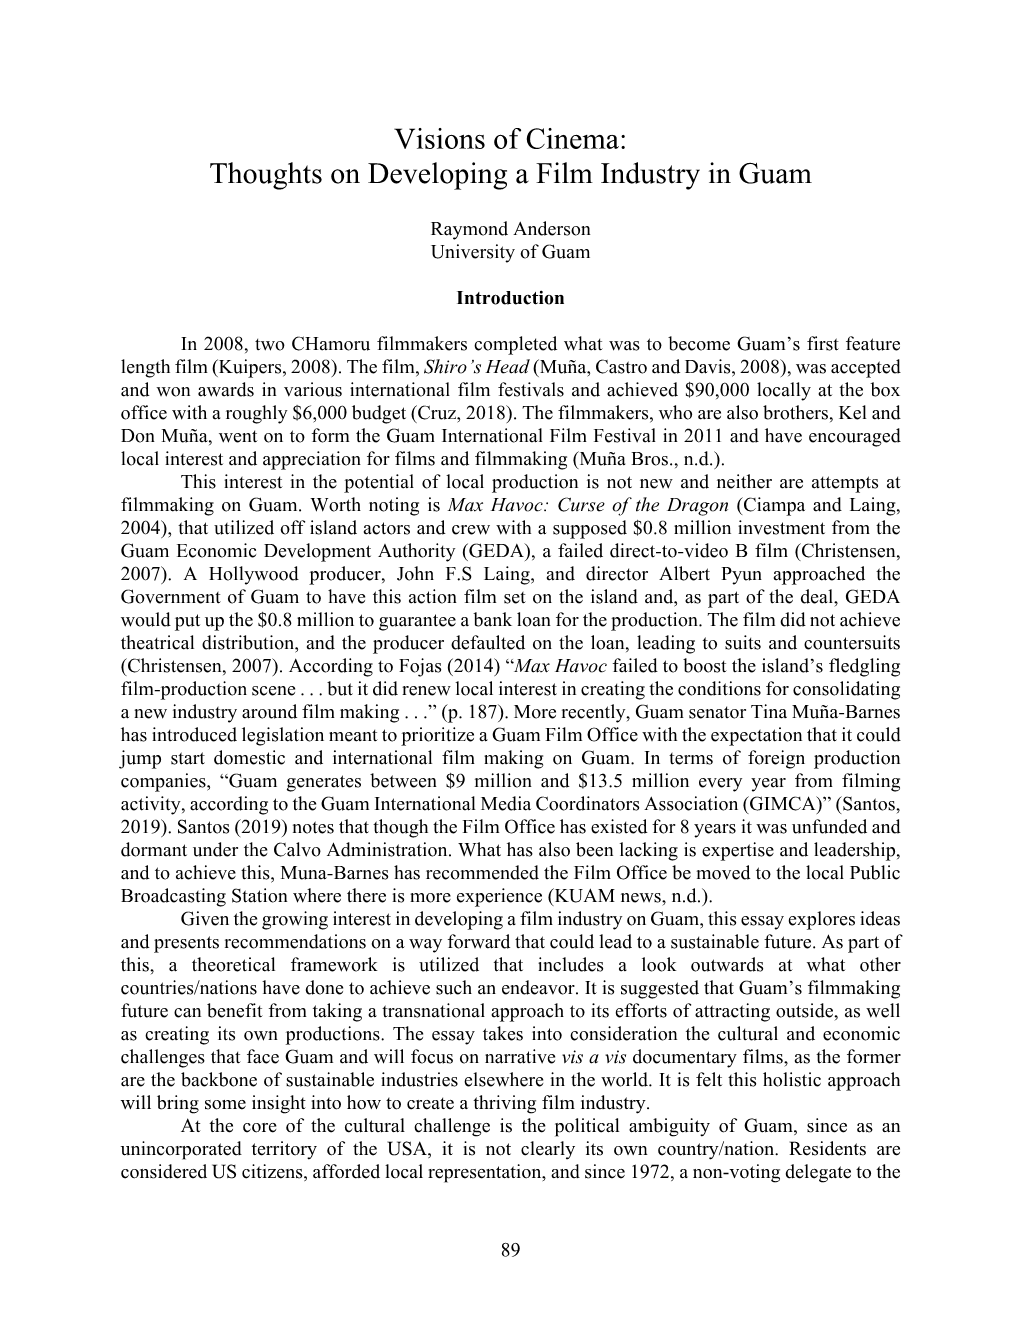 Visions of Cinema: Thoughts on Developing a Film Industry in Guam